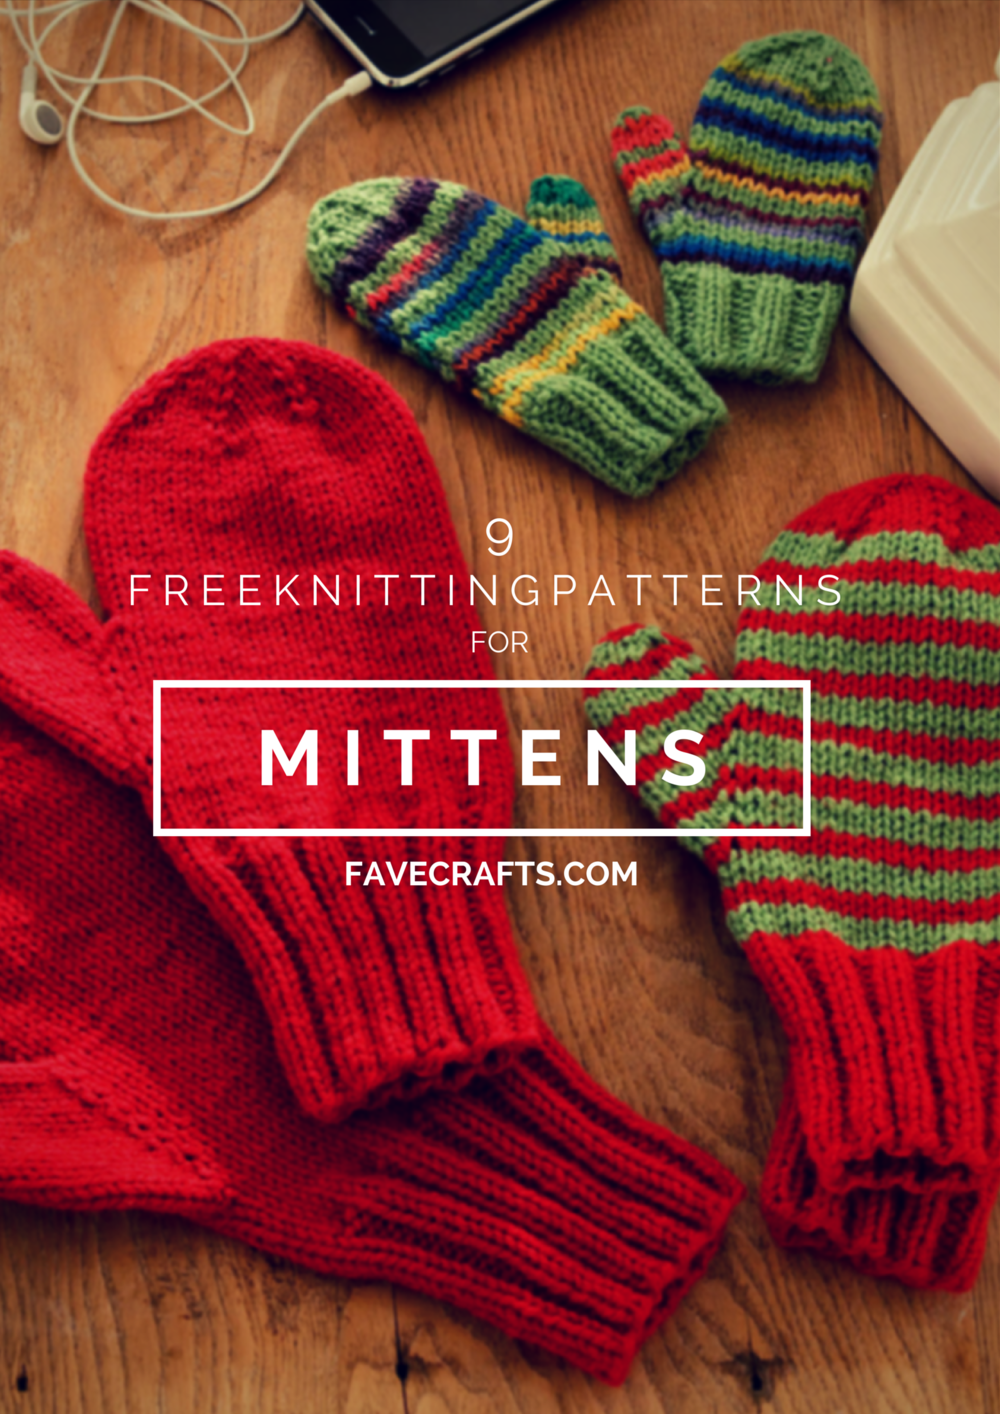 6 Free Knitting Patterns for Mittens FaveCrafts com